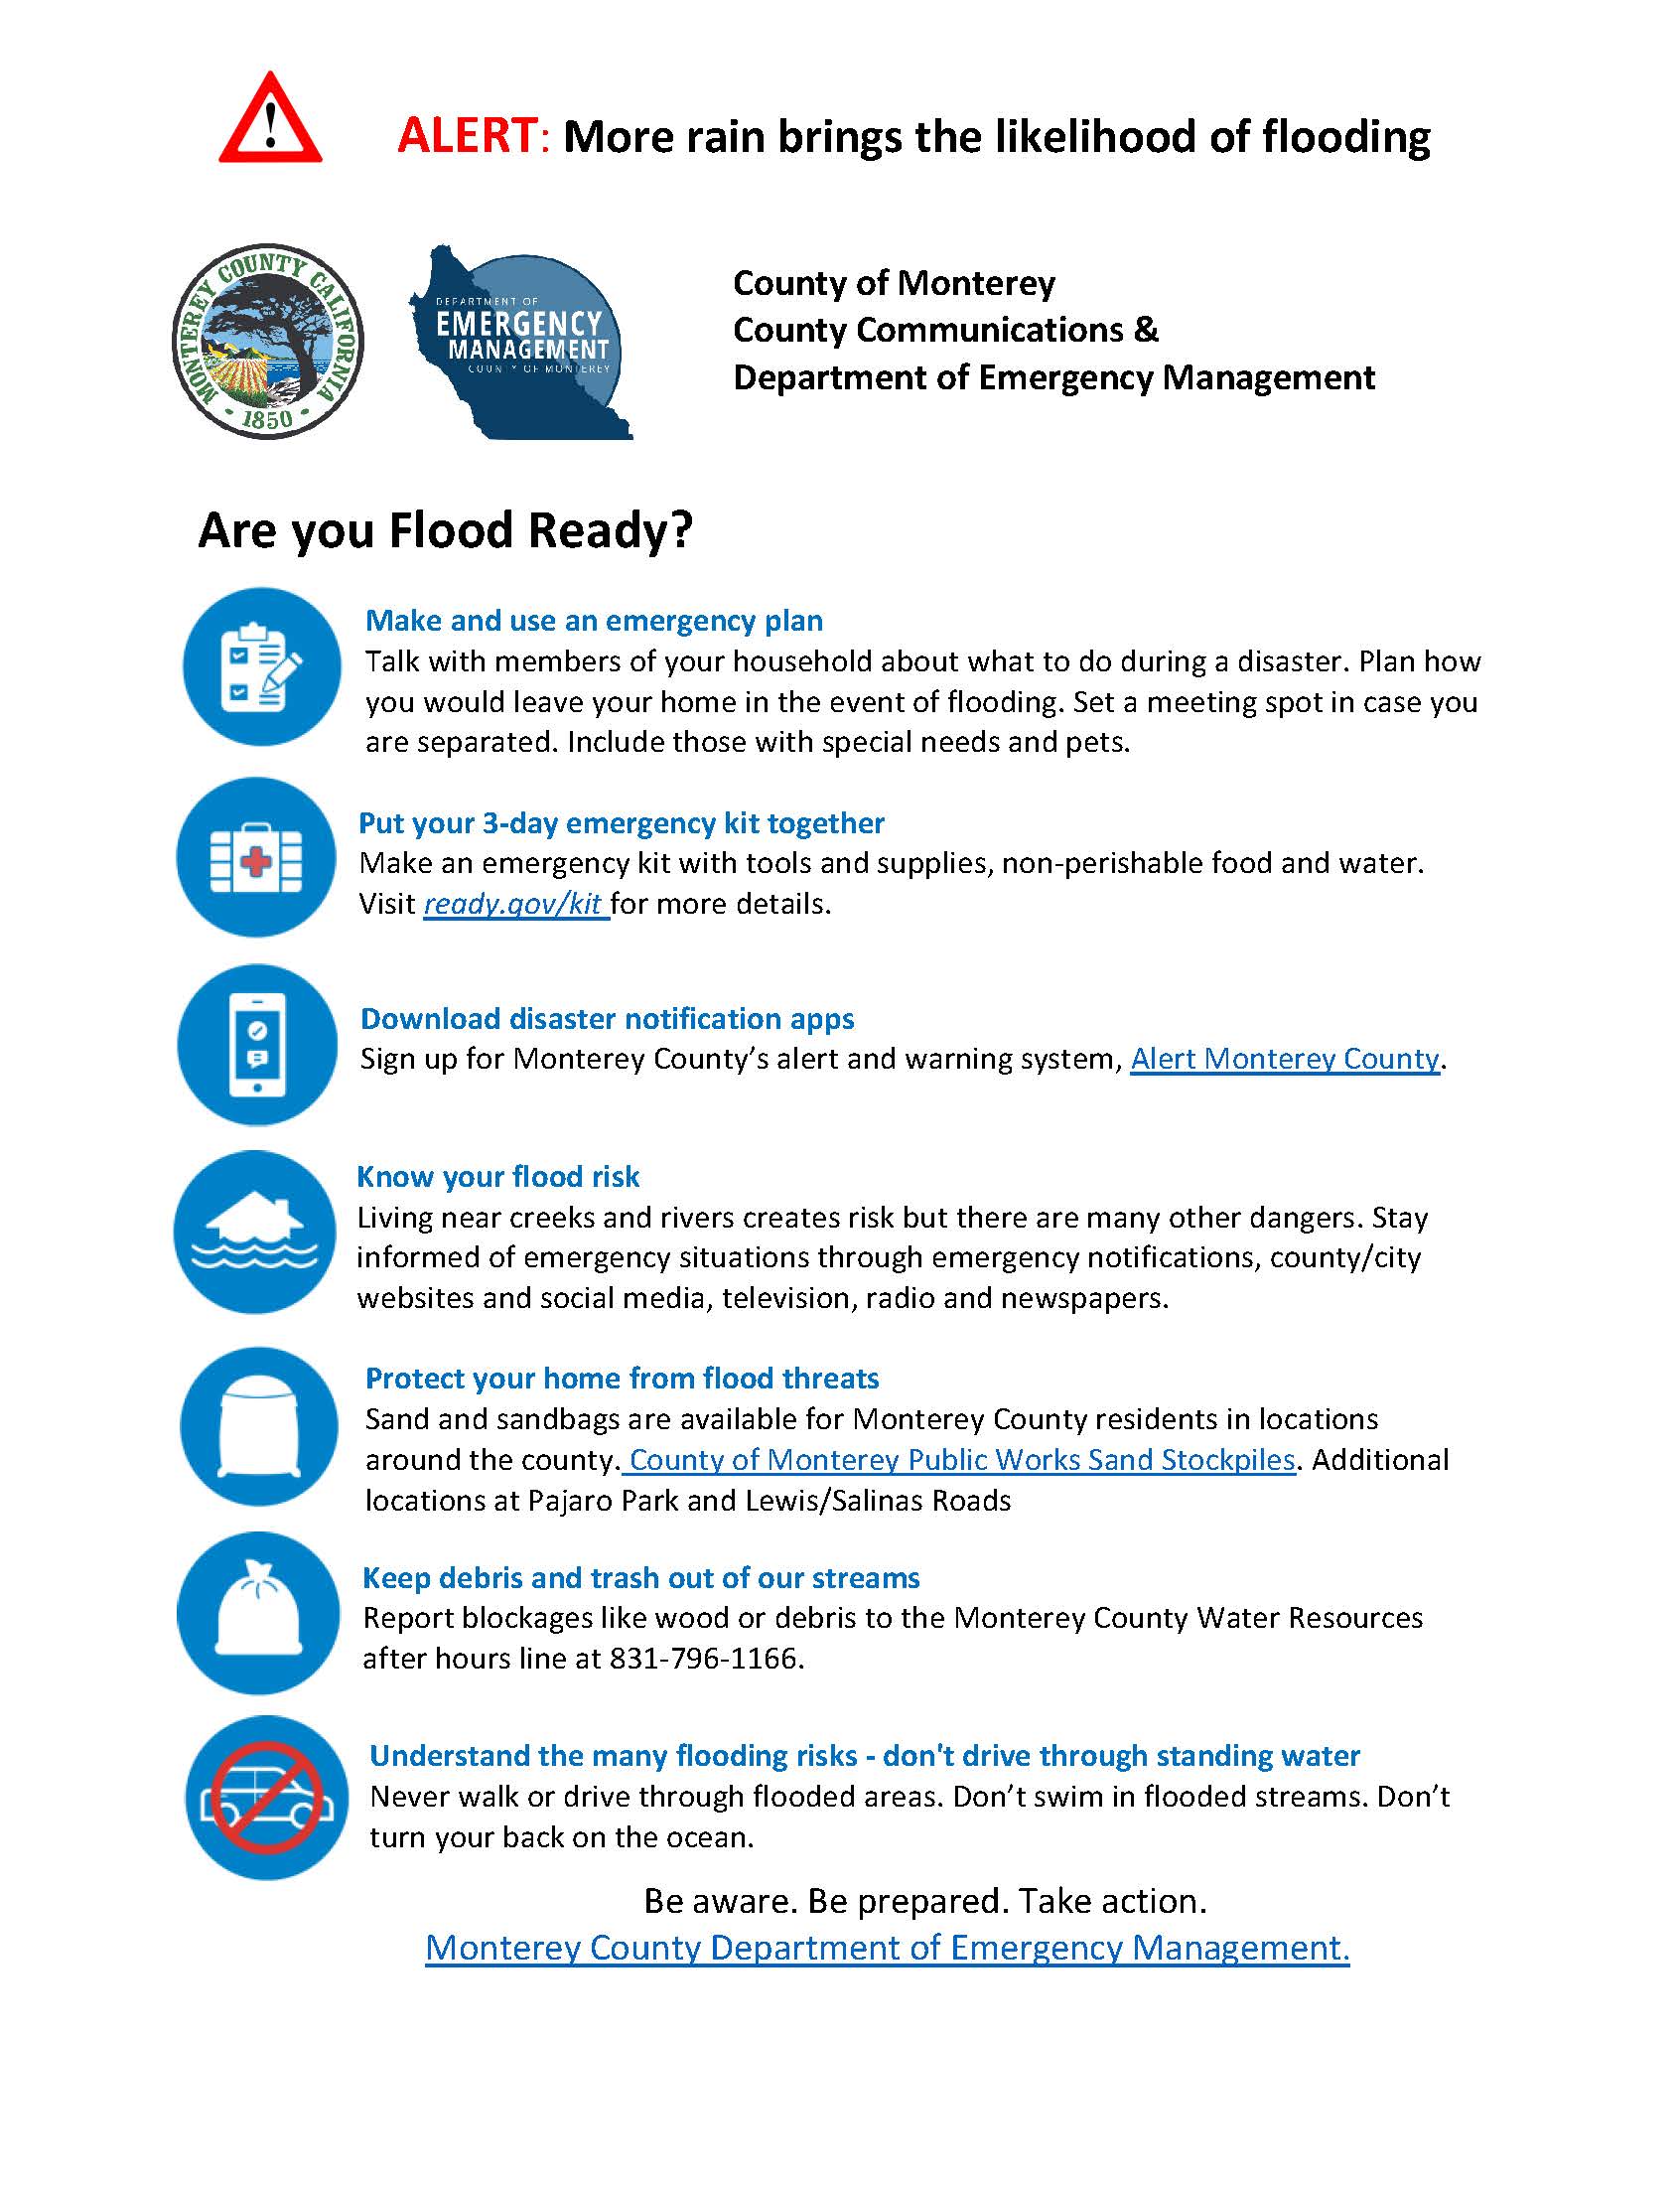 Are you flood ready flyer